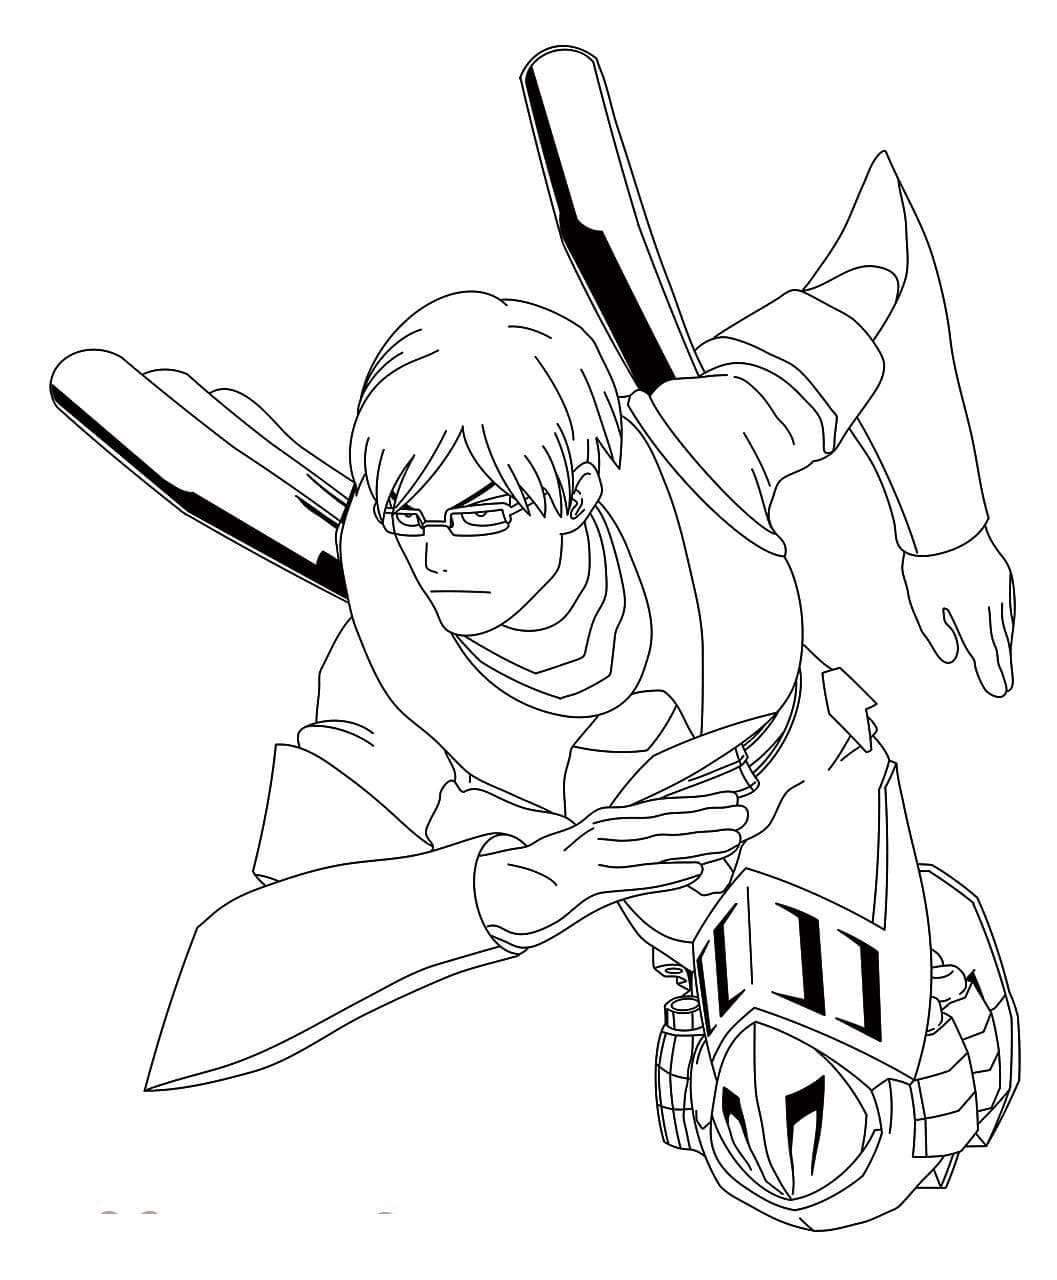 Tenya Iida Action Coloring Page - Free Printable Coloring Pages for Kids